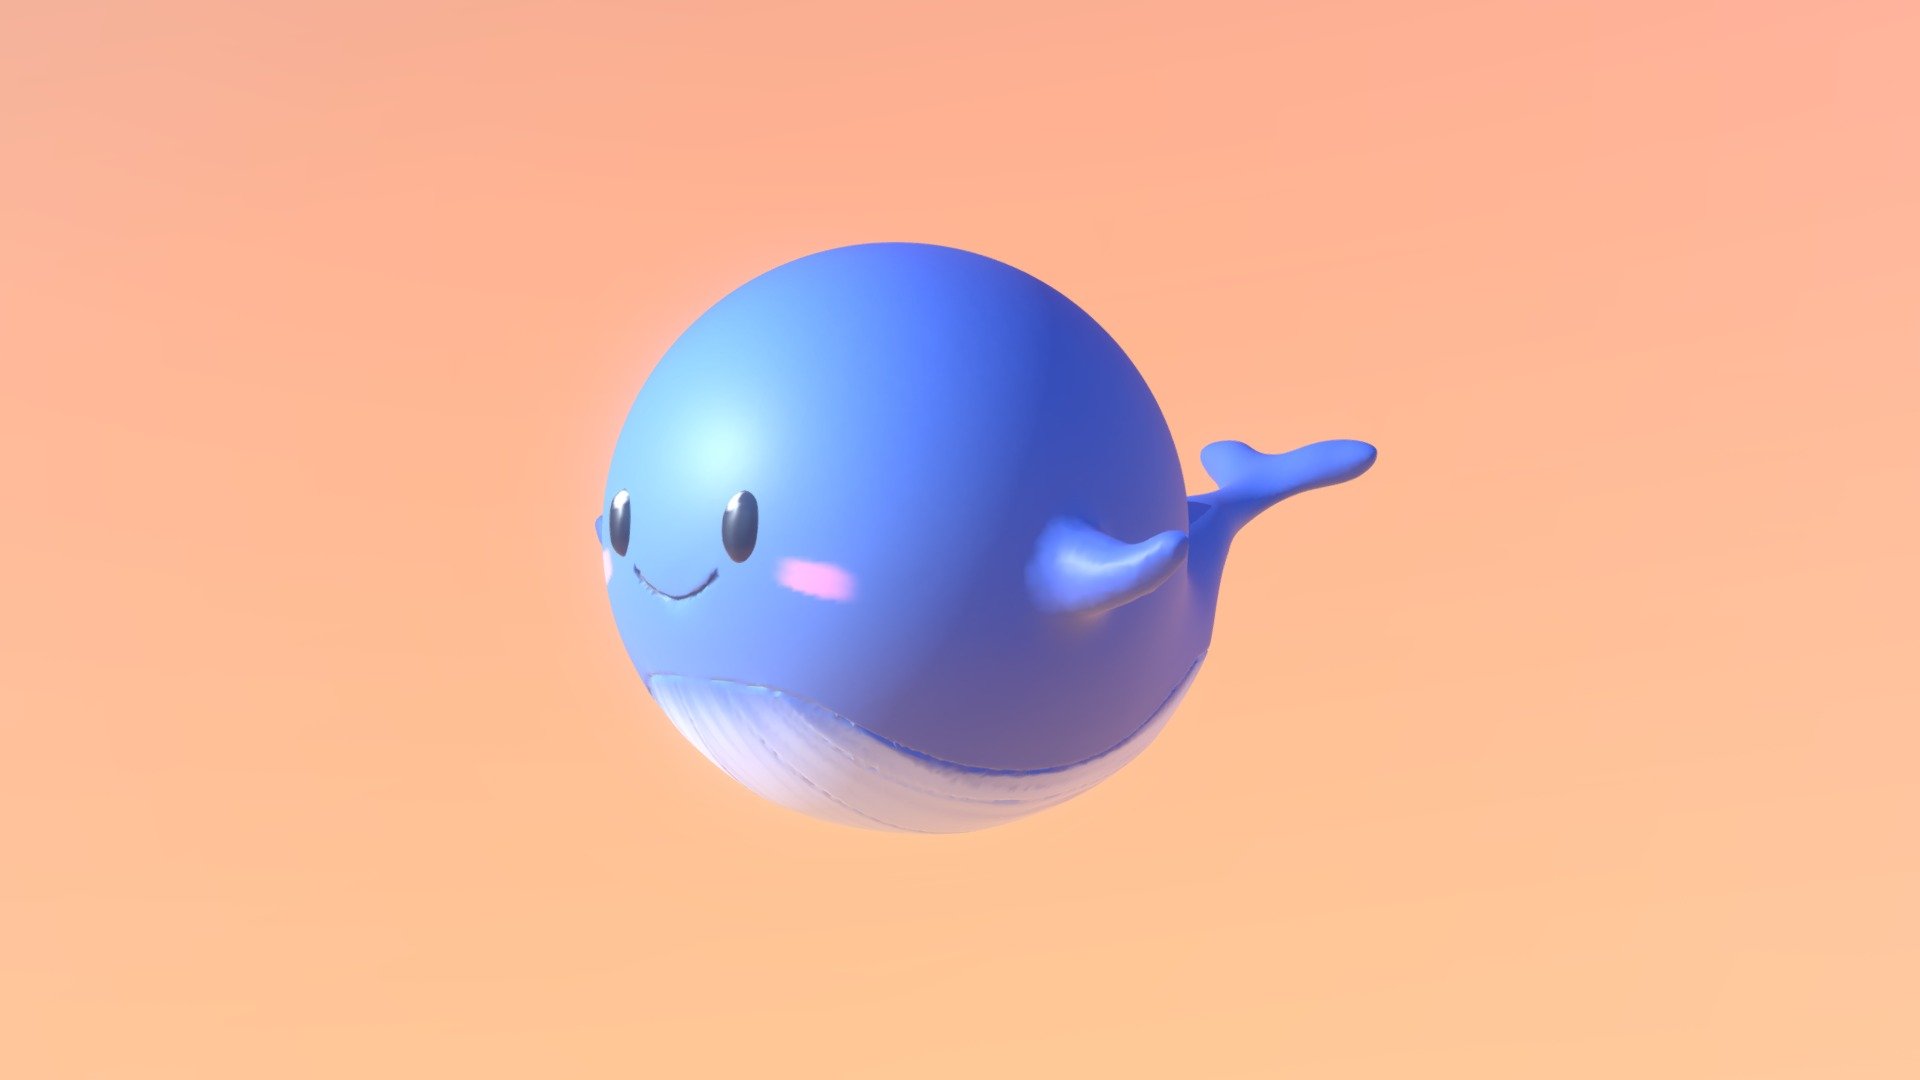 This was done in class as practice 3d model